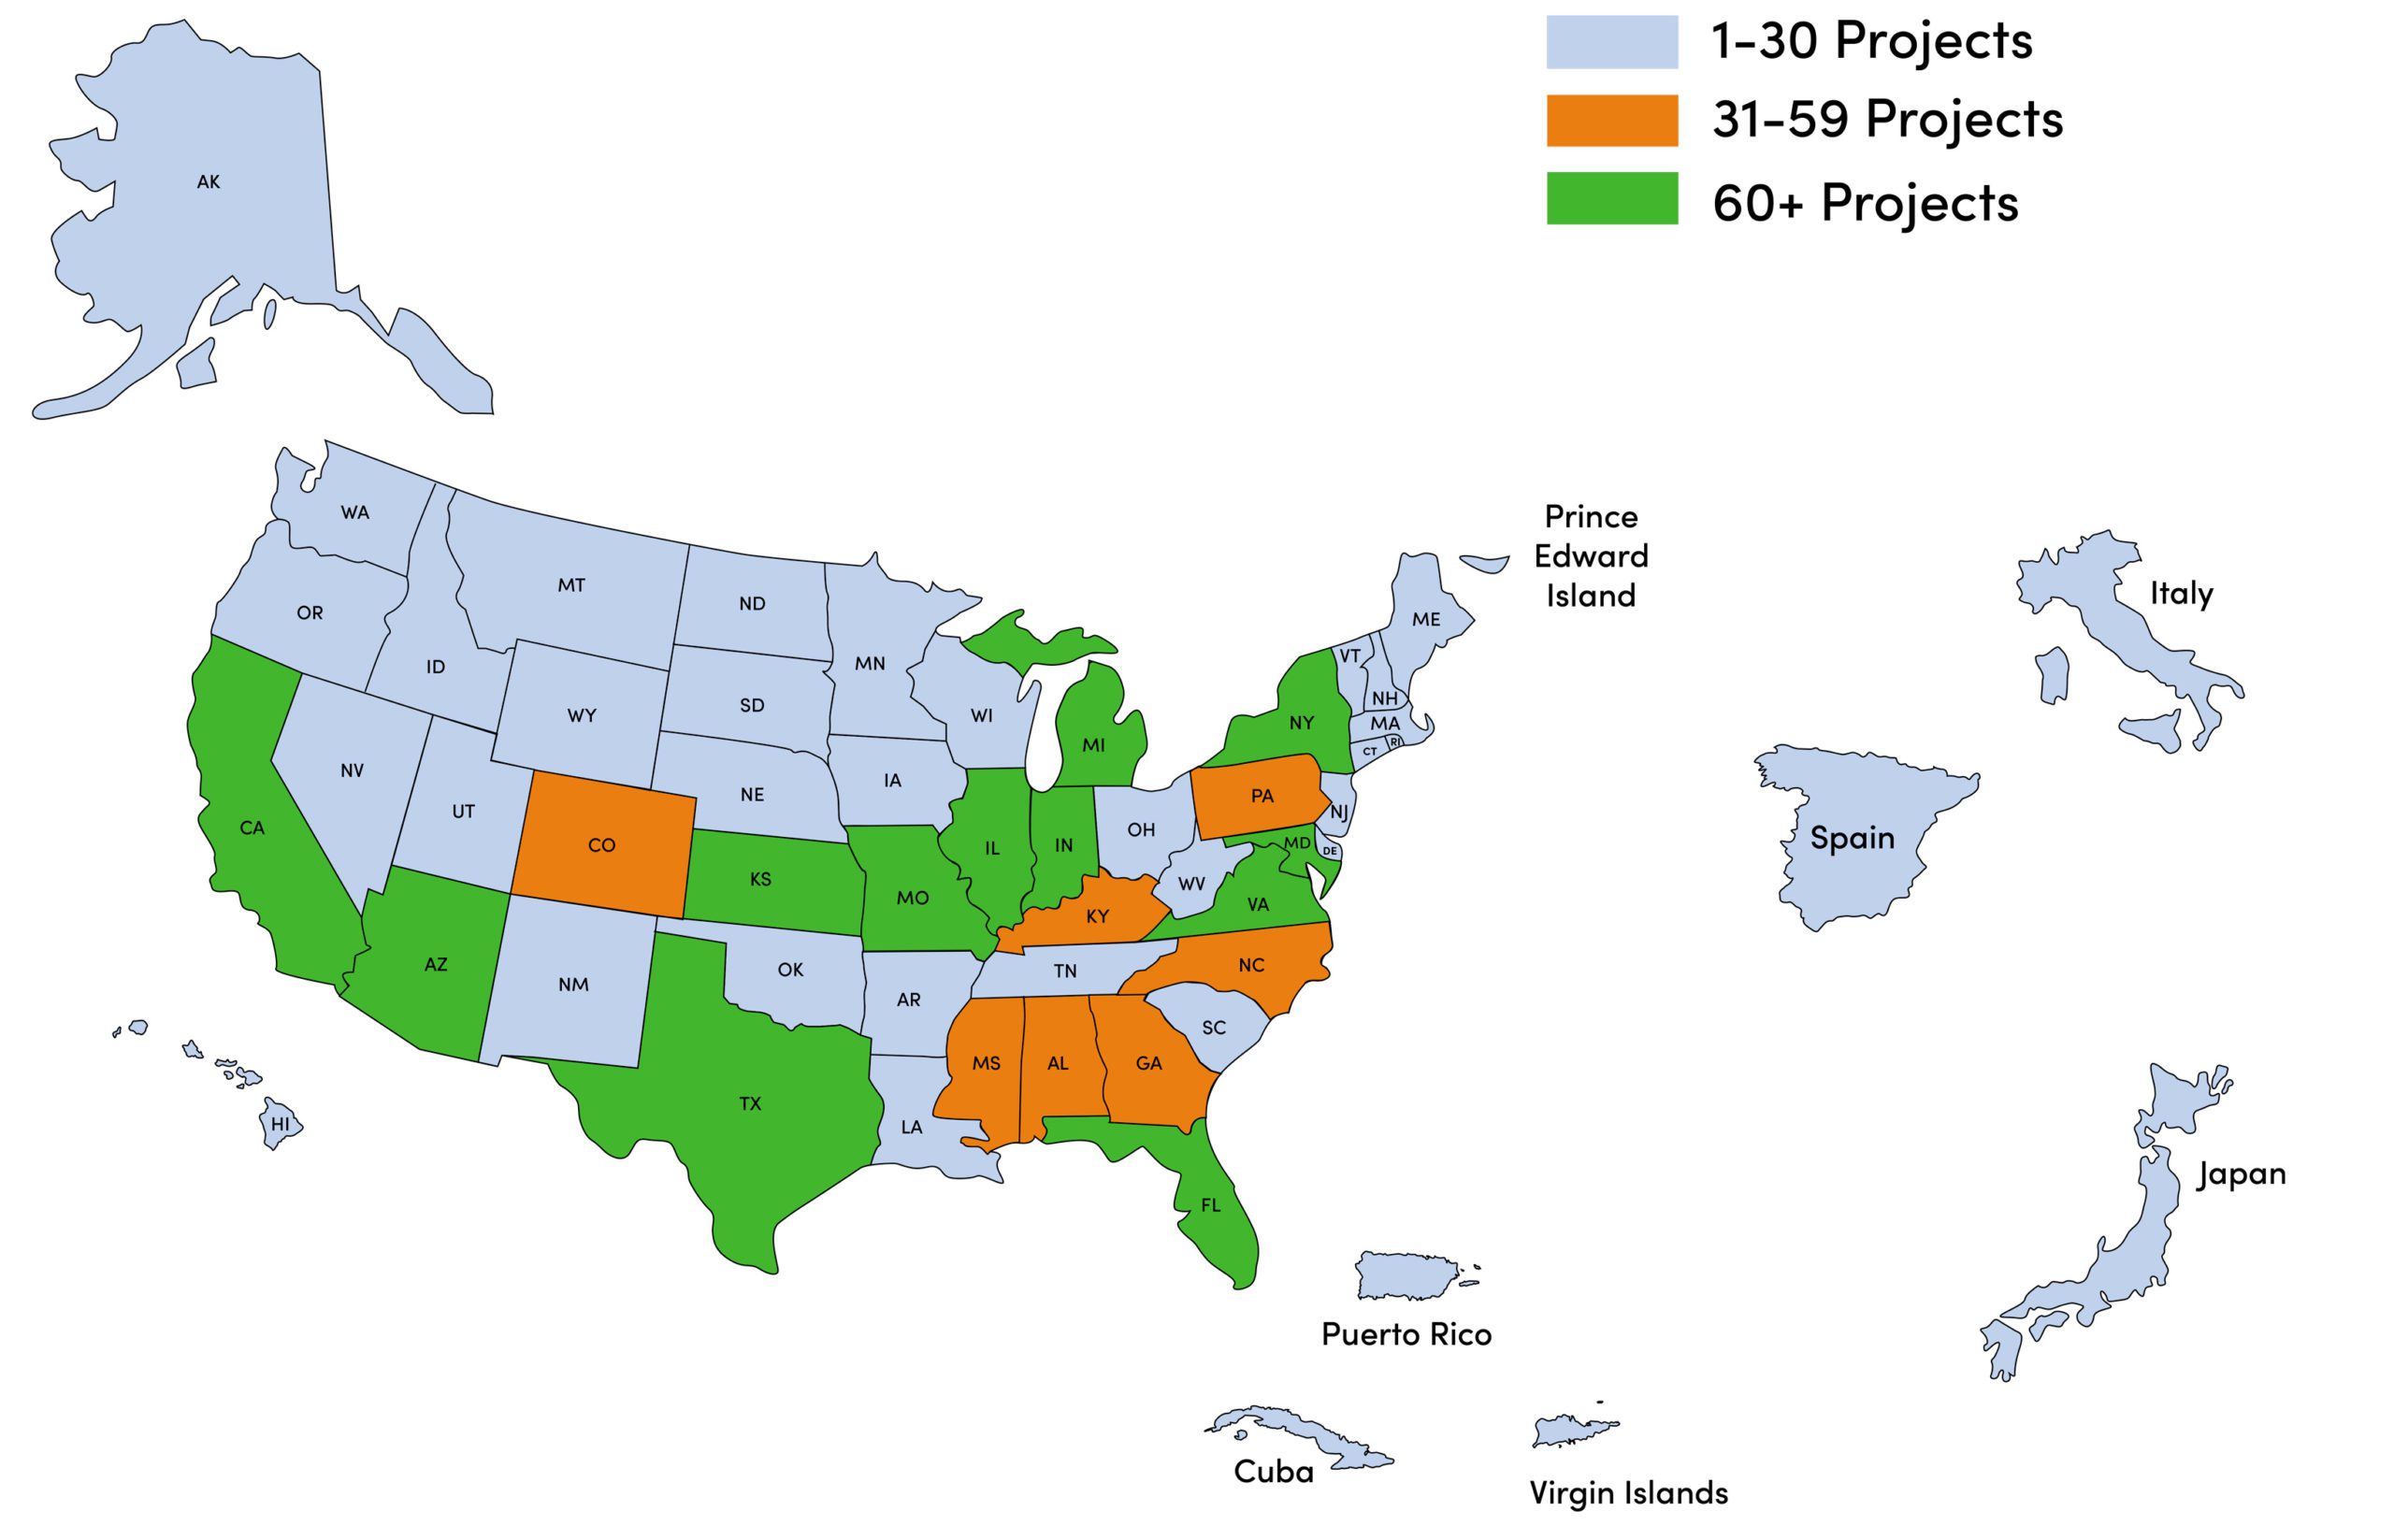 Heat map of the United States displaying the amount of projects in each state